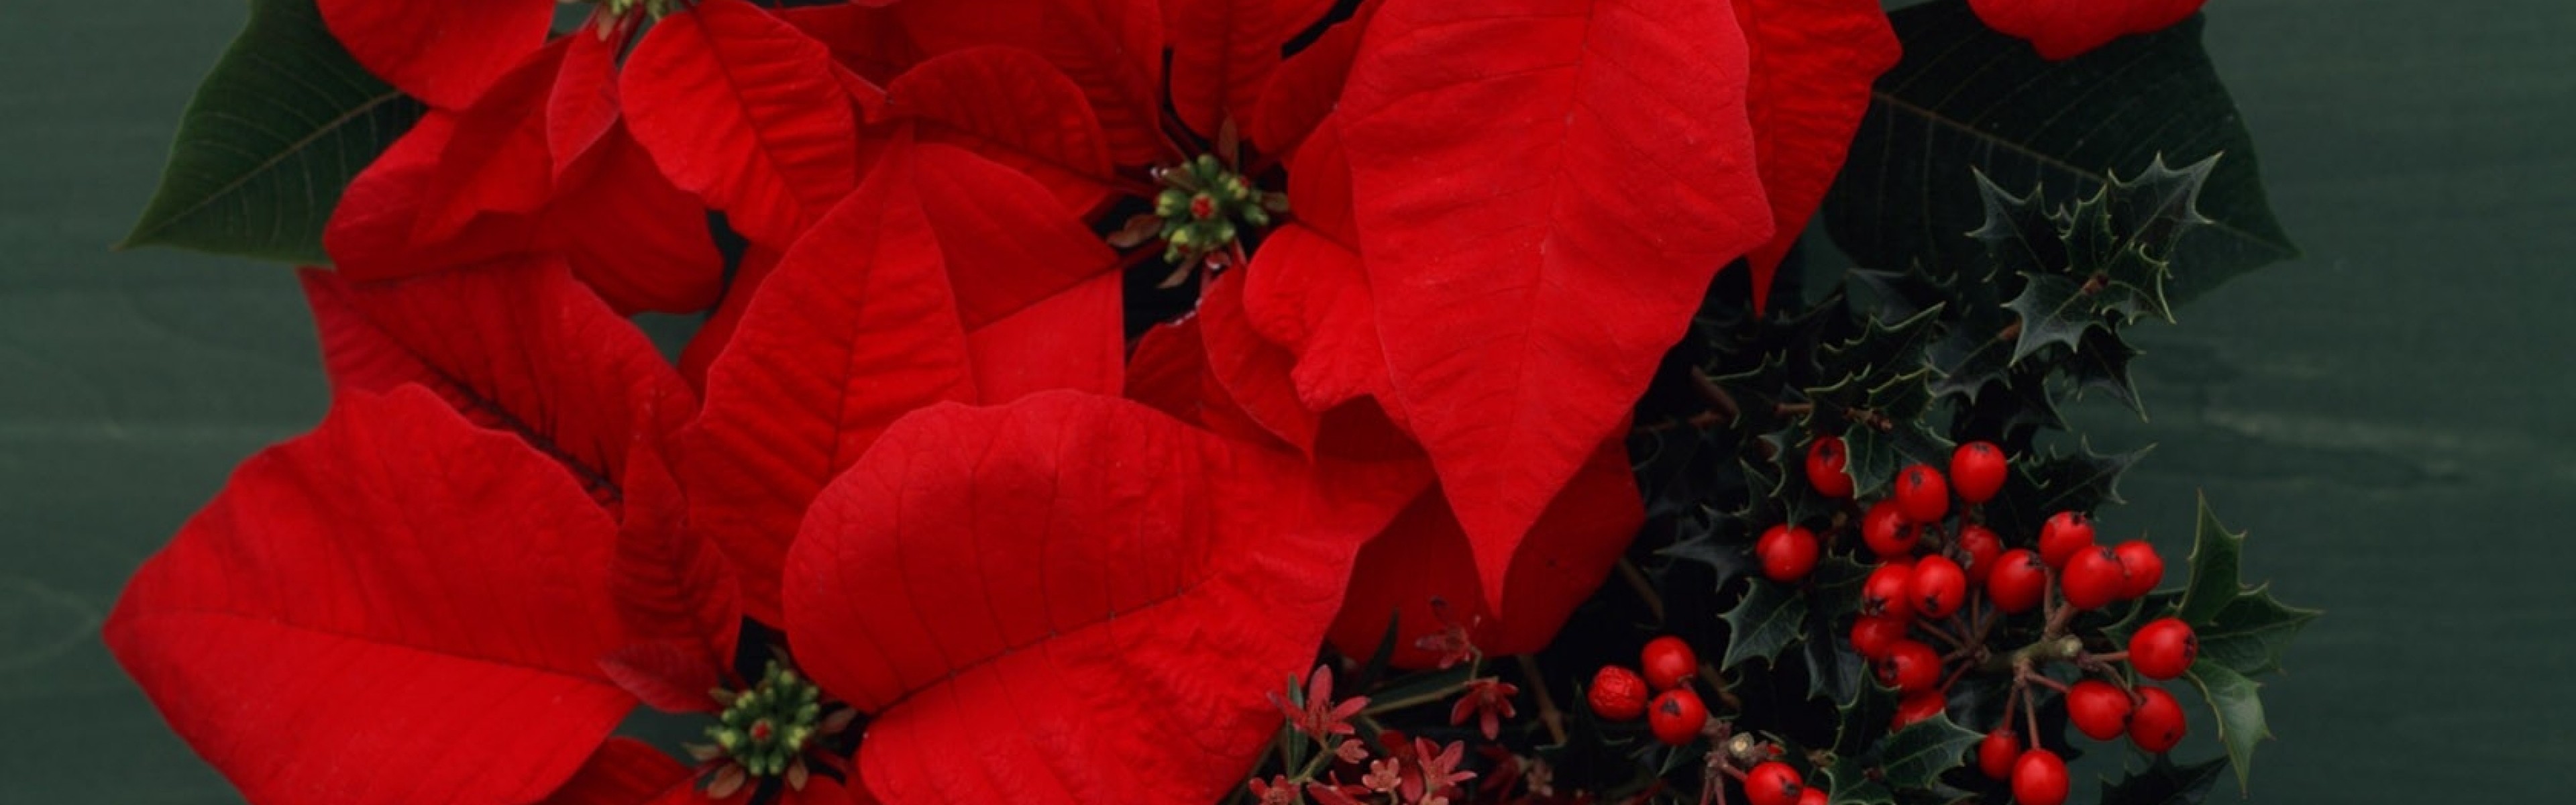 3840x1200  Wallpaper poinsettia, flowers, red, berries, composition, beauty